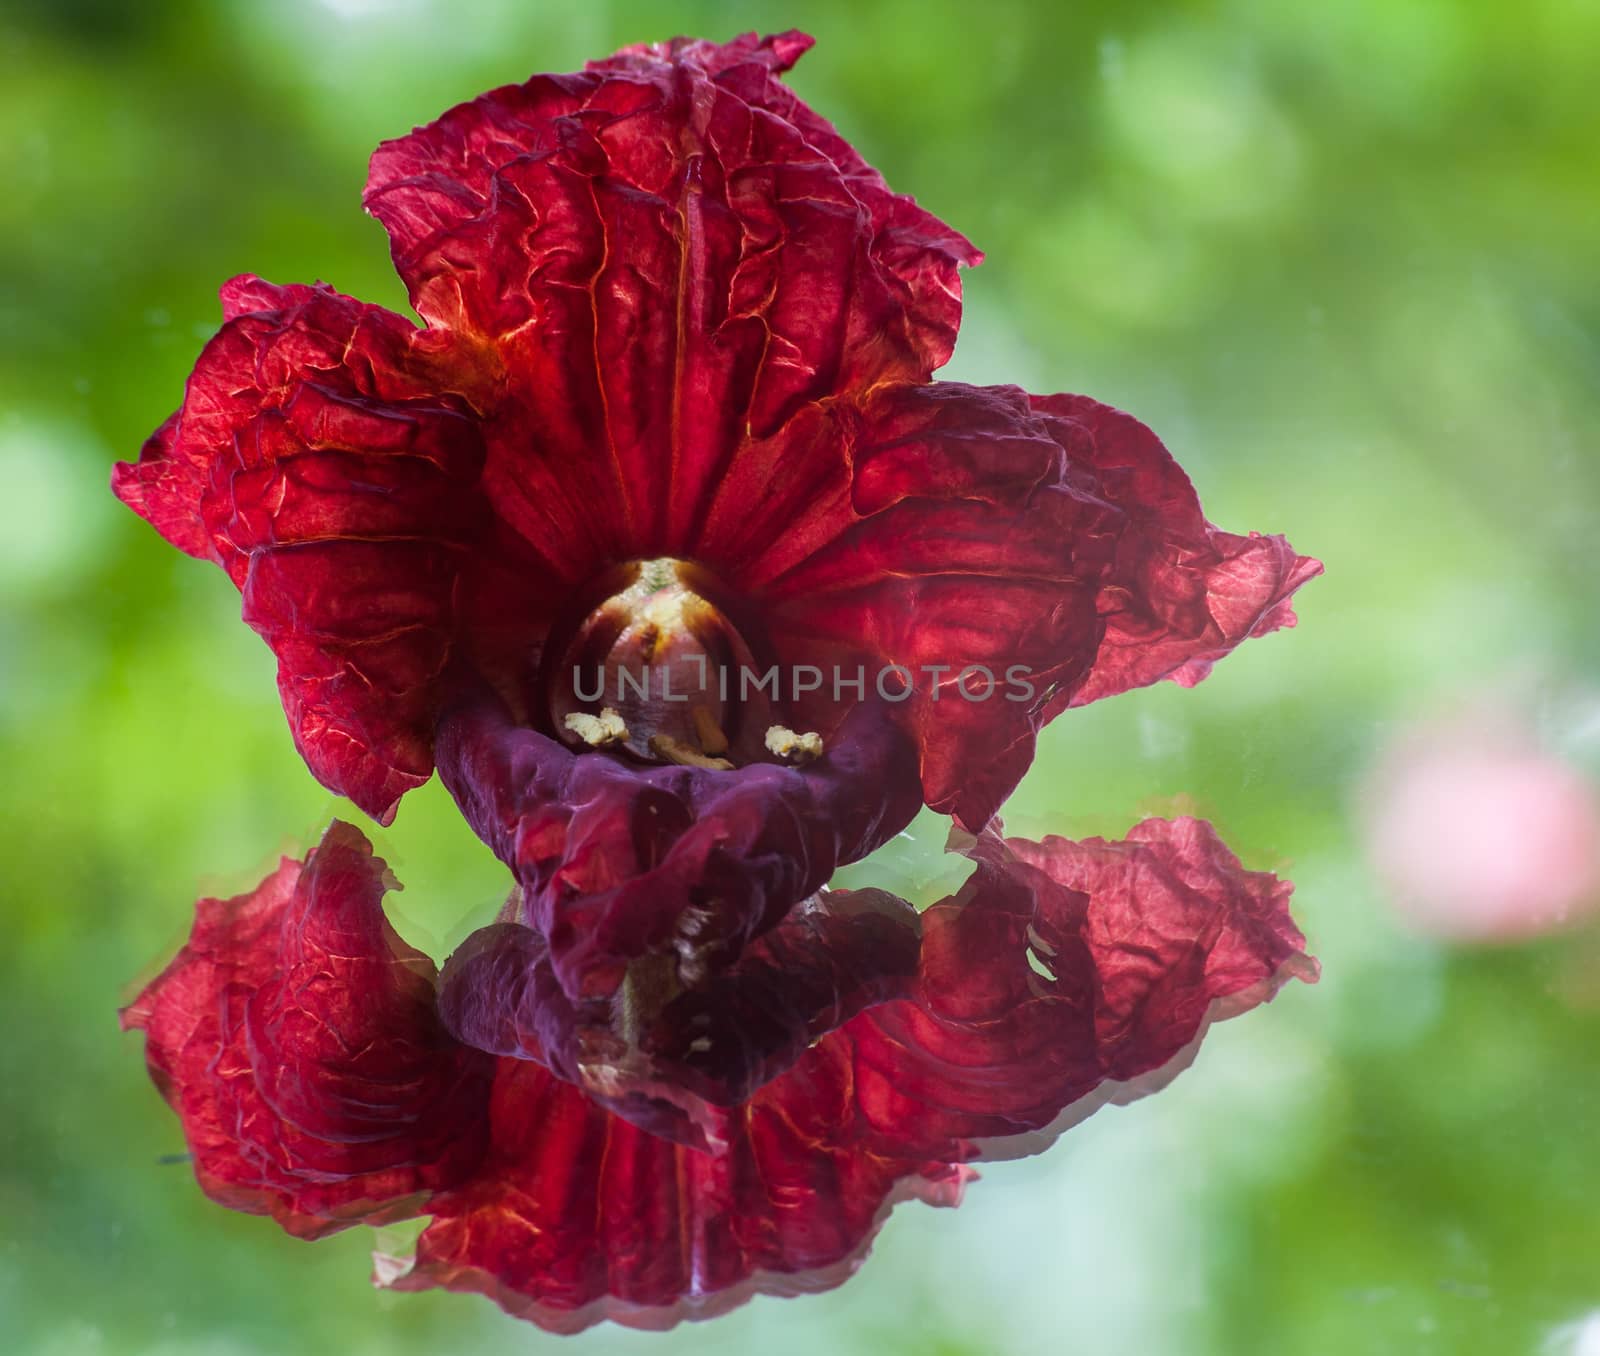 The blood-red flower of the sausage tree (Kigelia africana) reflected on glass, resulting in a double reflection.